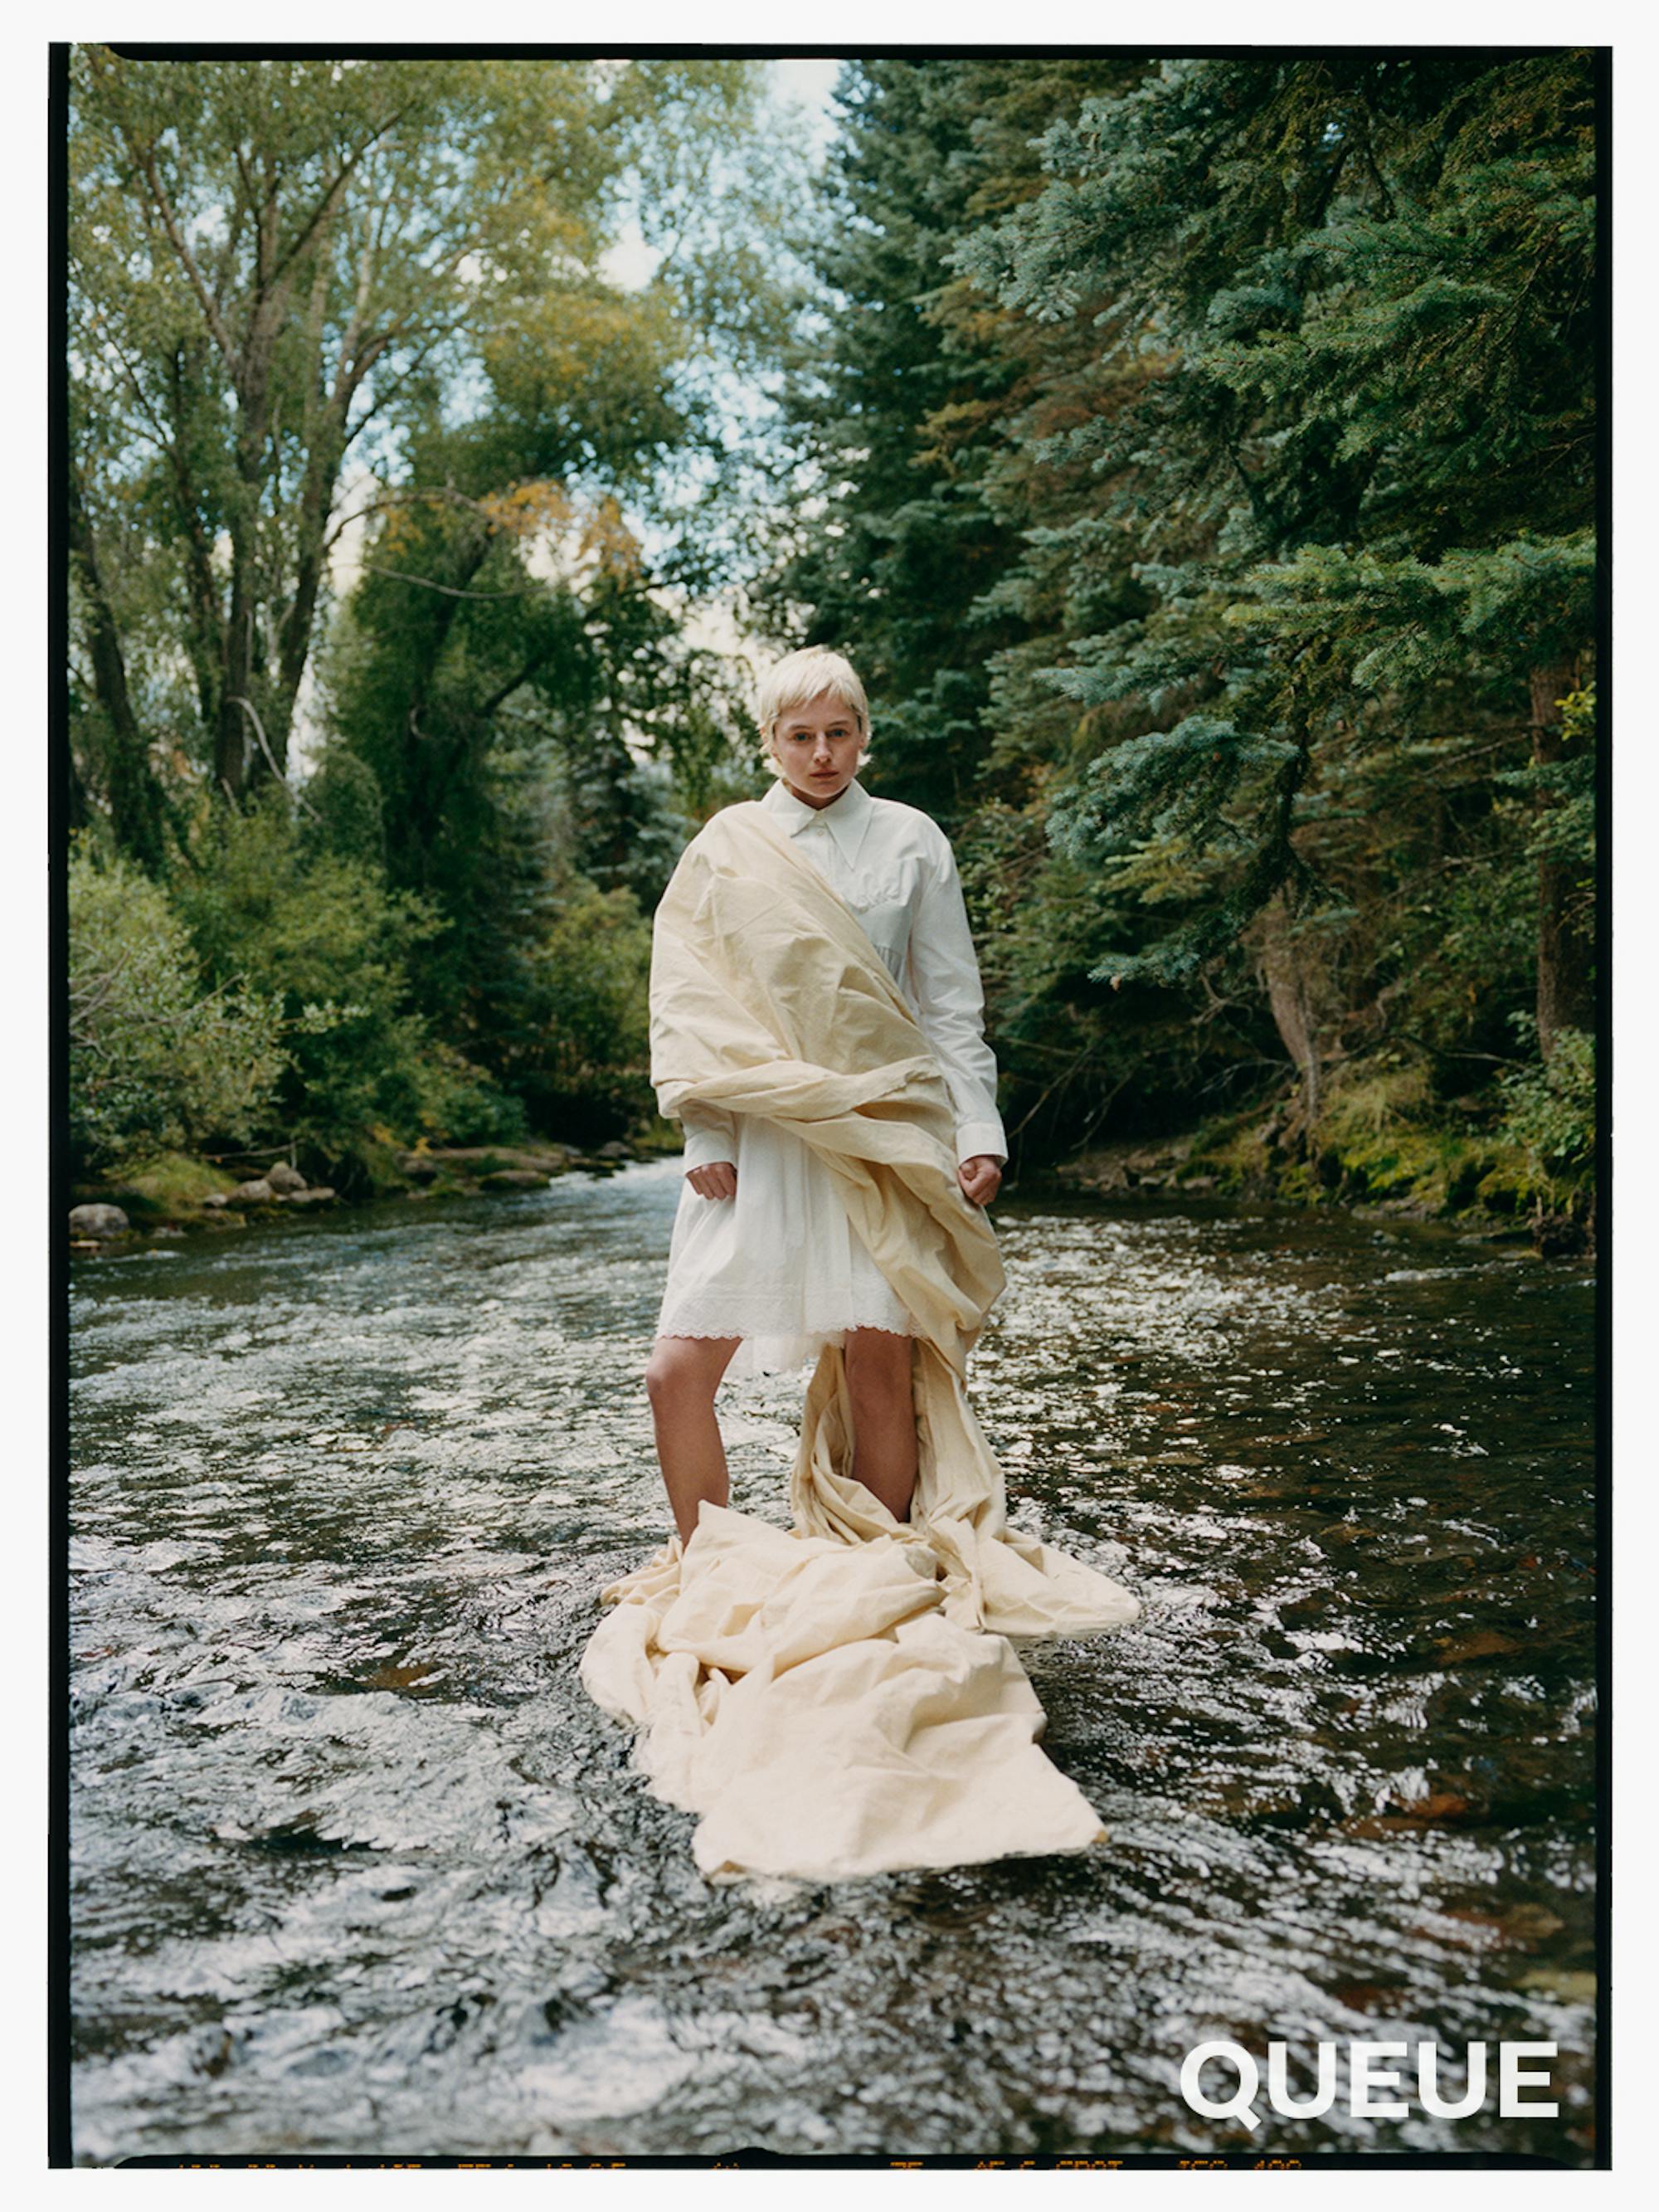 Emma Corrin wears a white toga-like outfit and stands in a running river. 